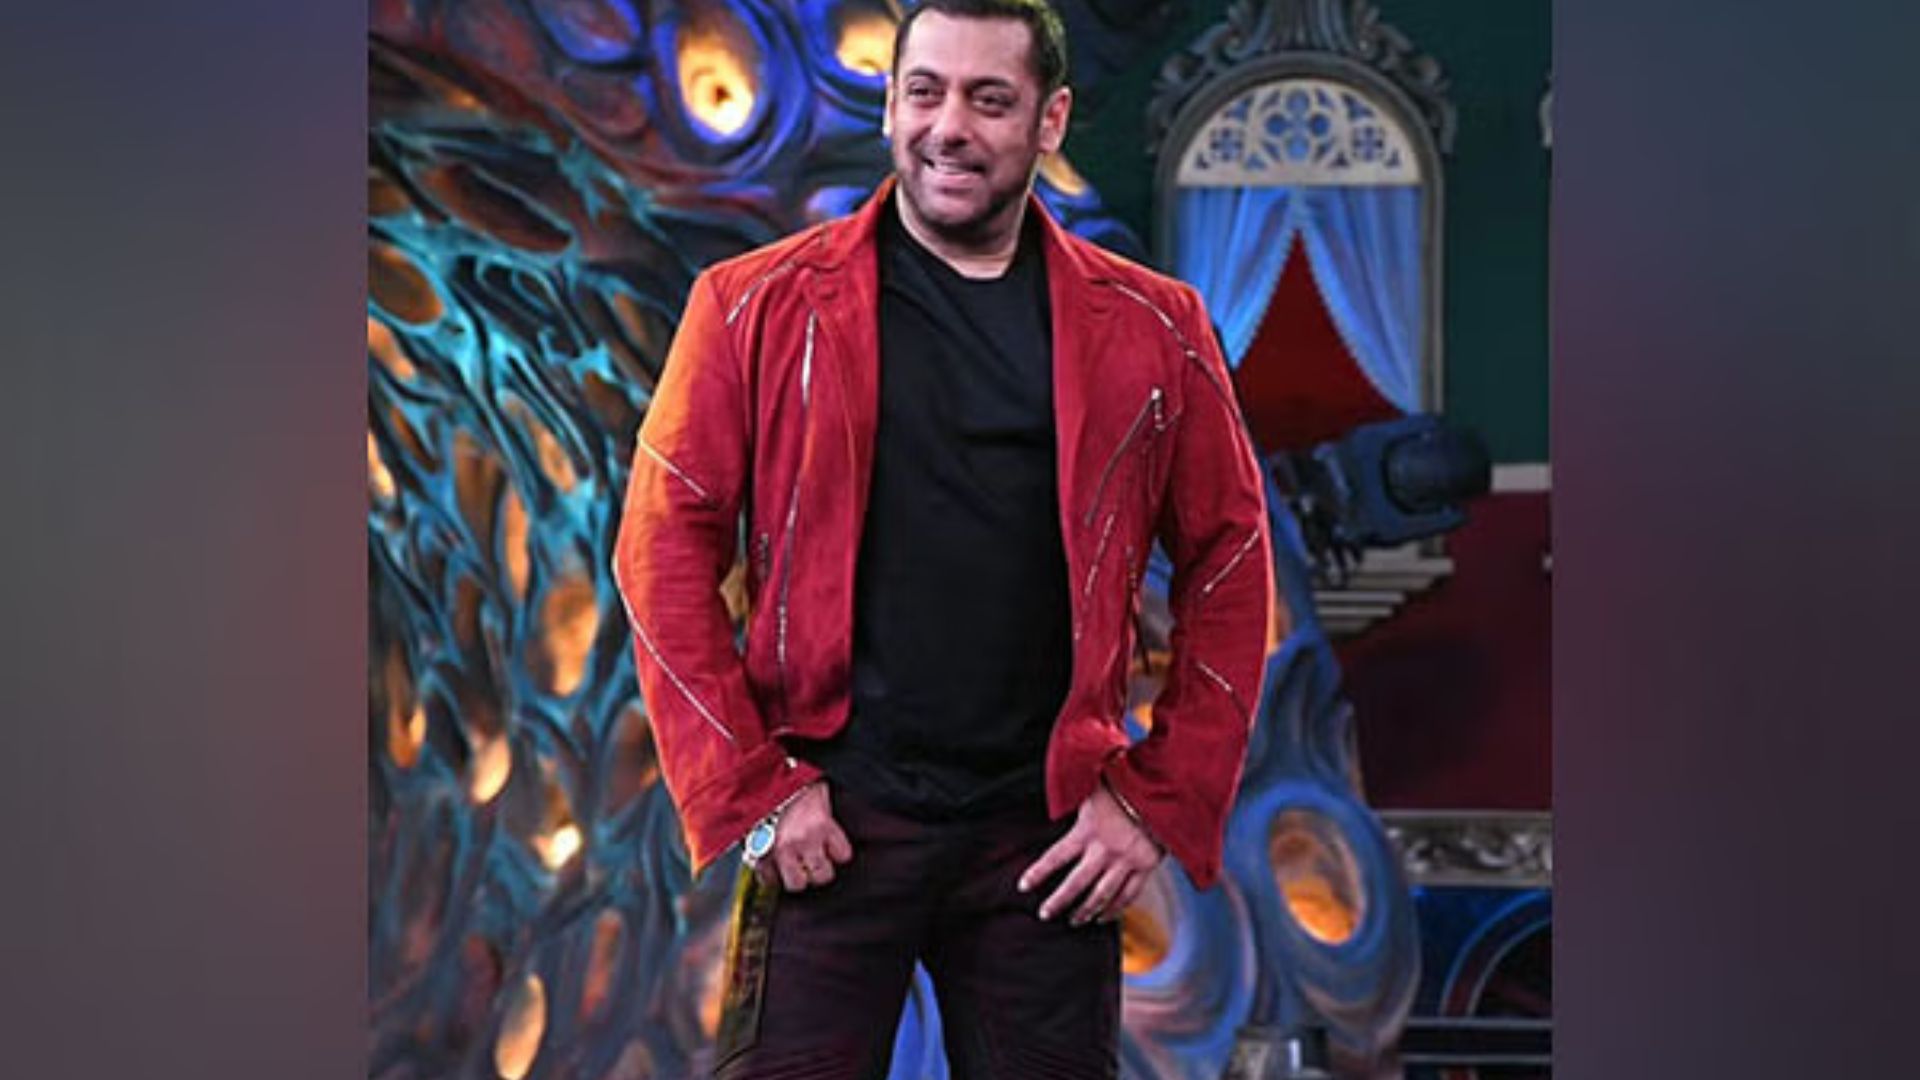 Salman Khan specifically asks the Bigg Boss creators to allow fans to enter the house